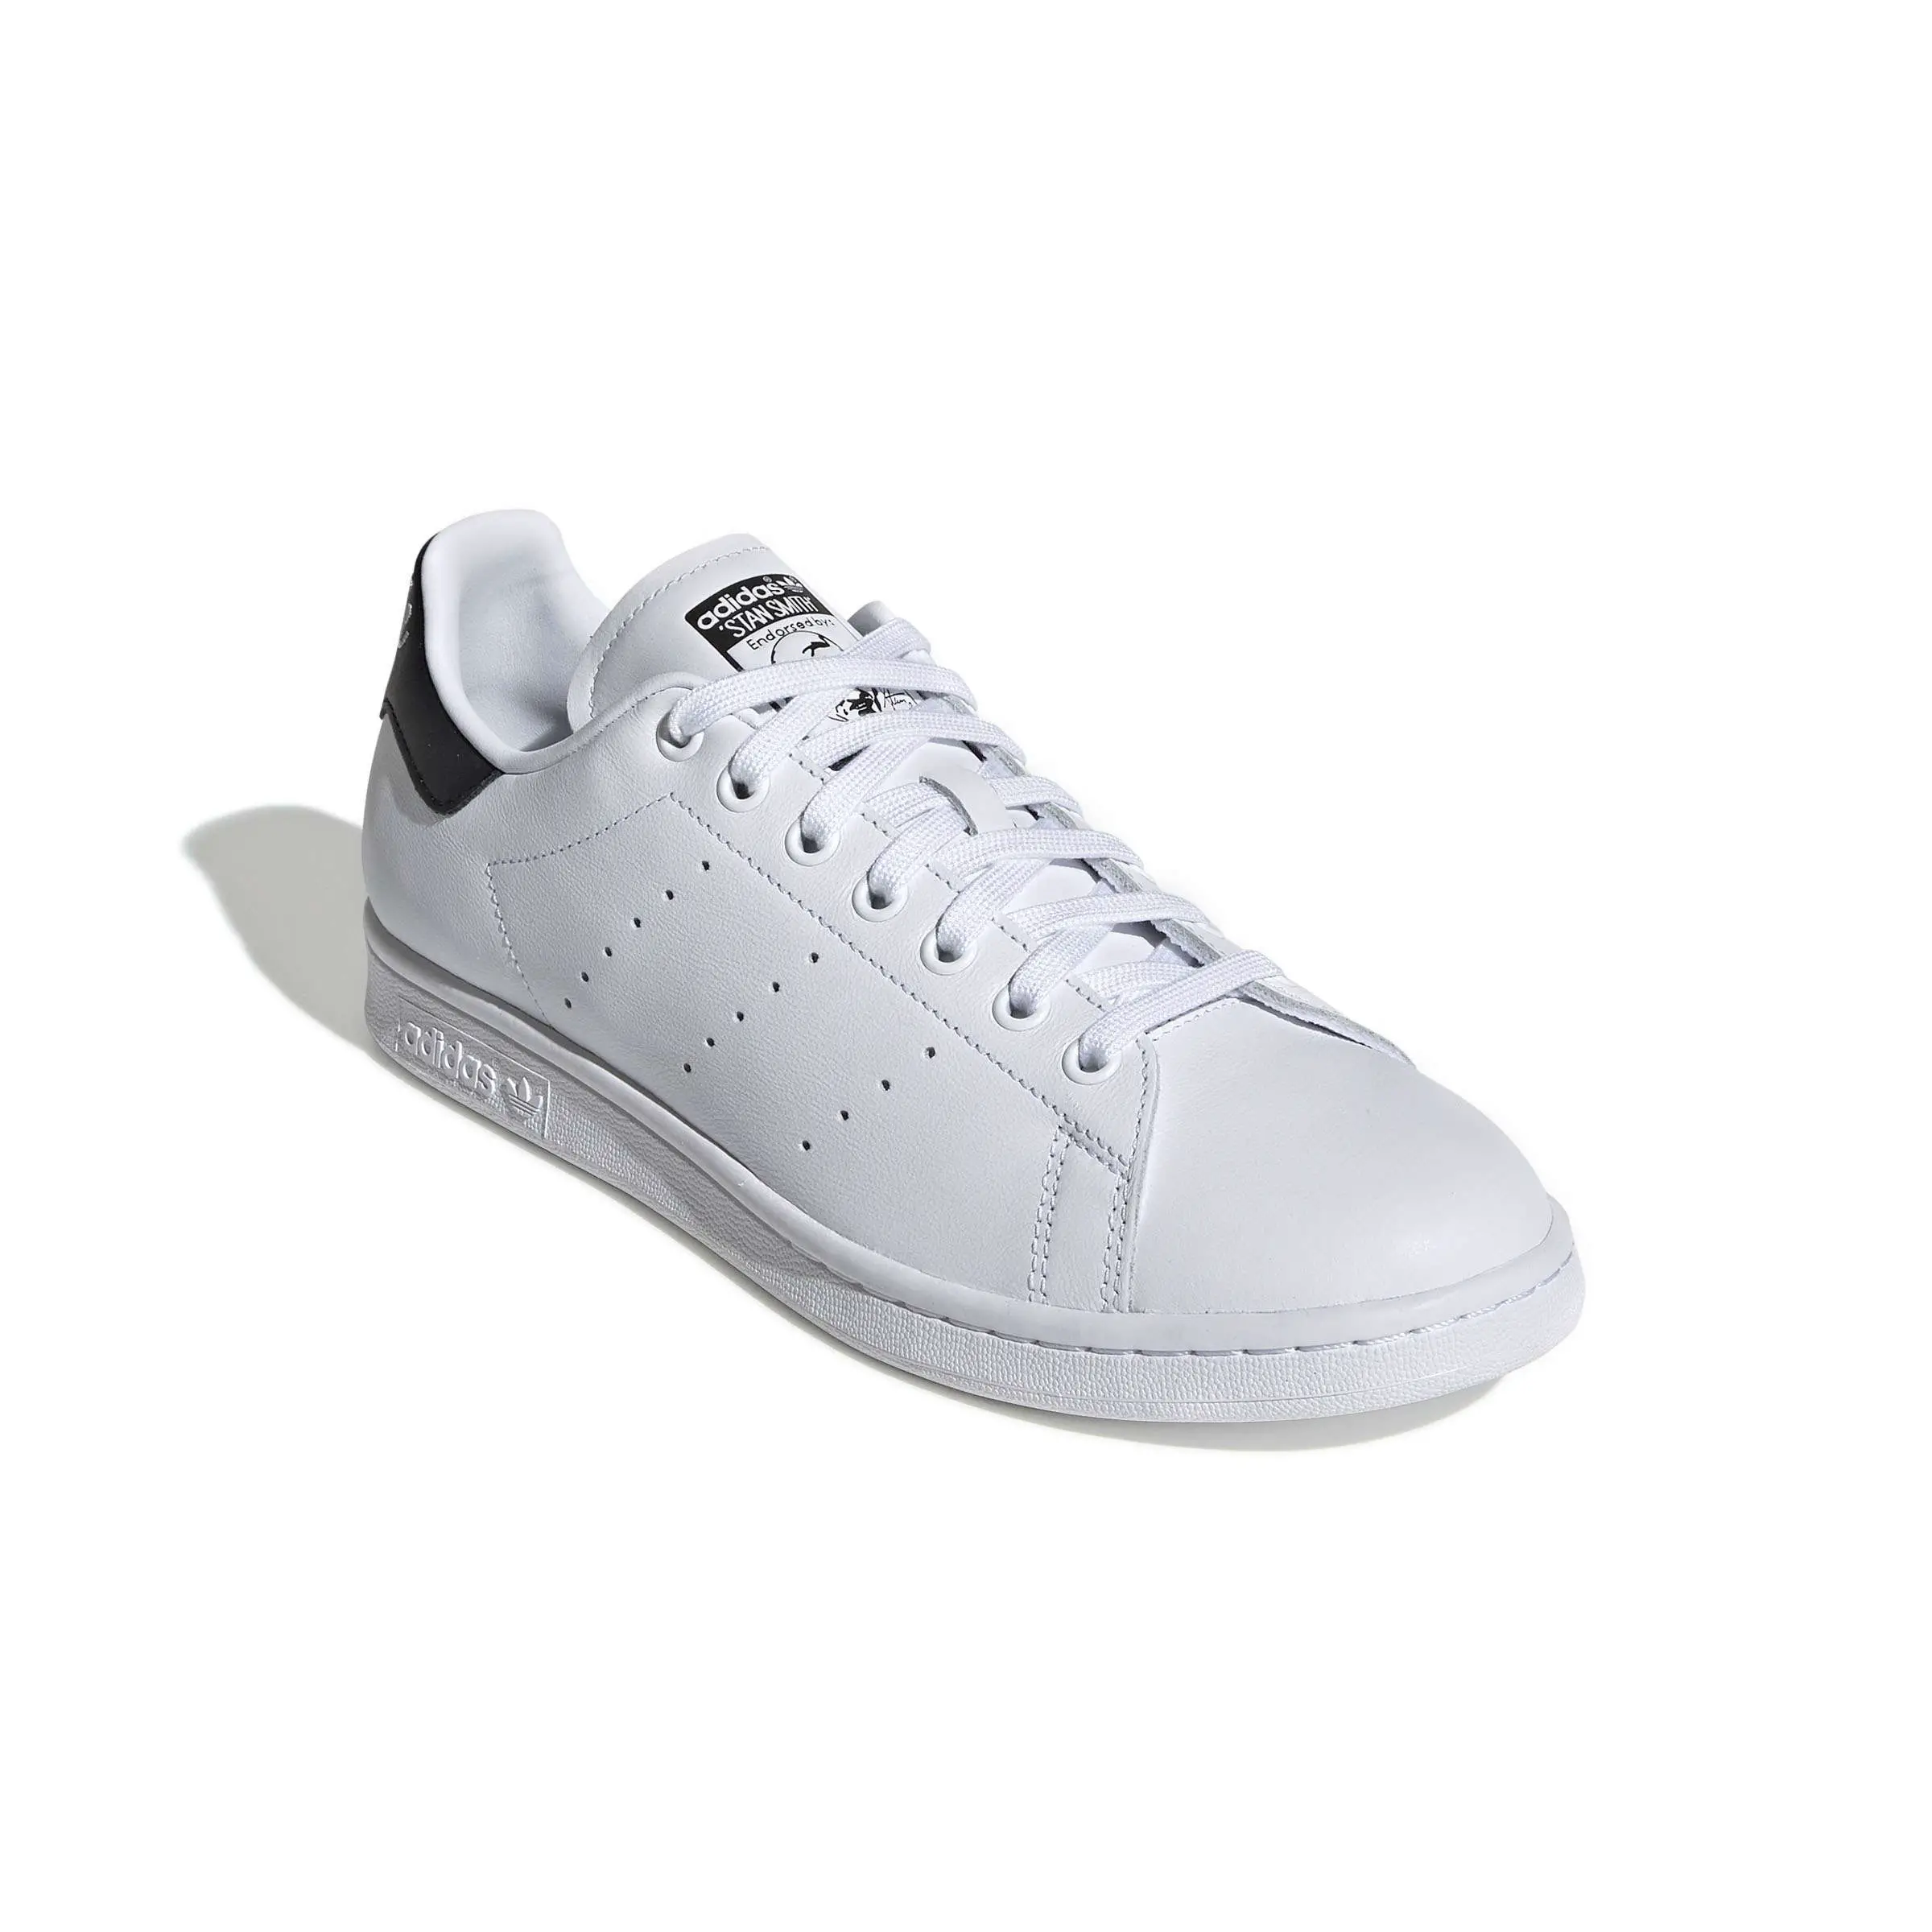 New Authentic Adidas Stan Smith Men White Leather Sneakers ...